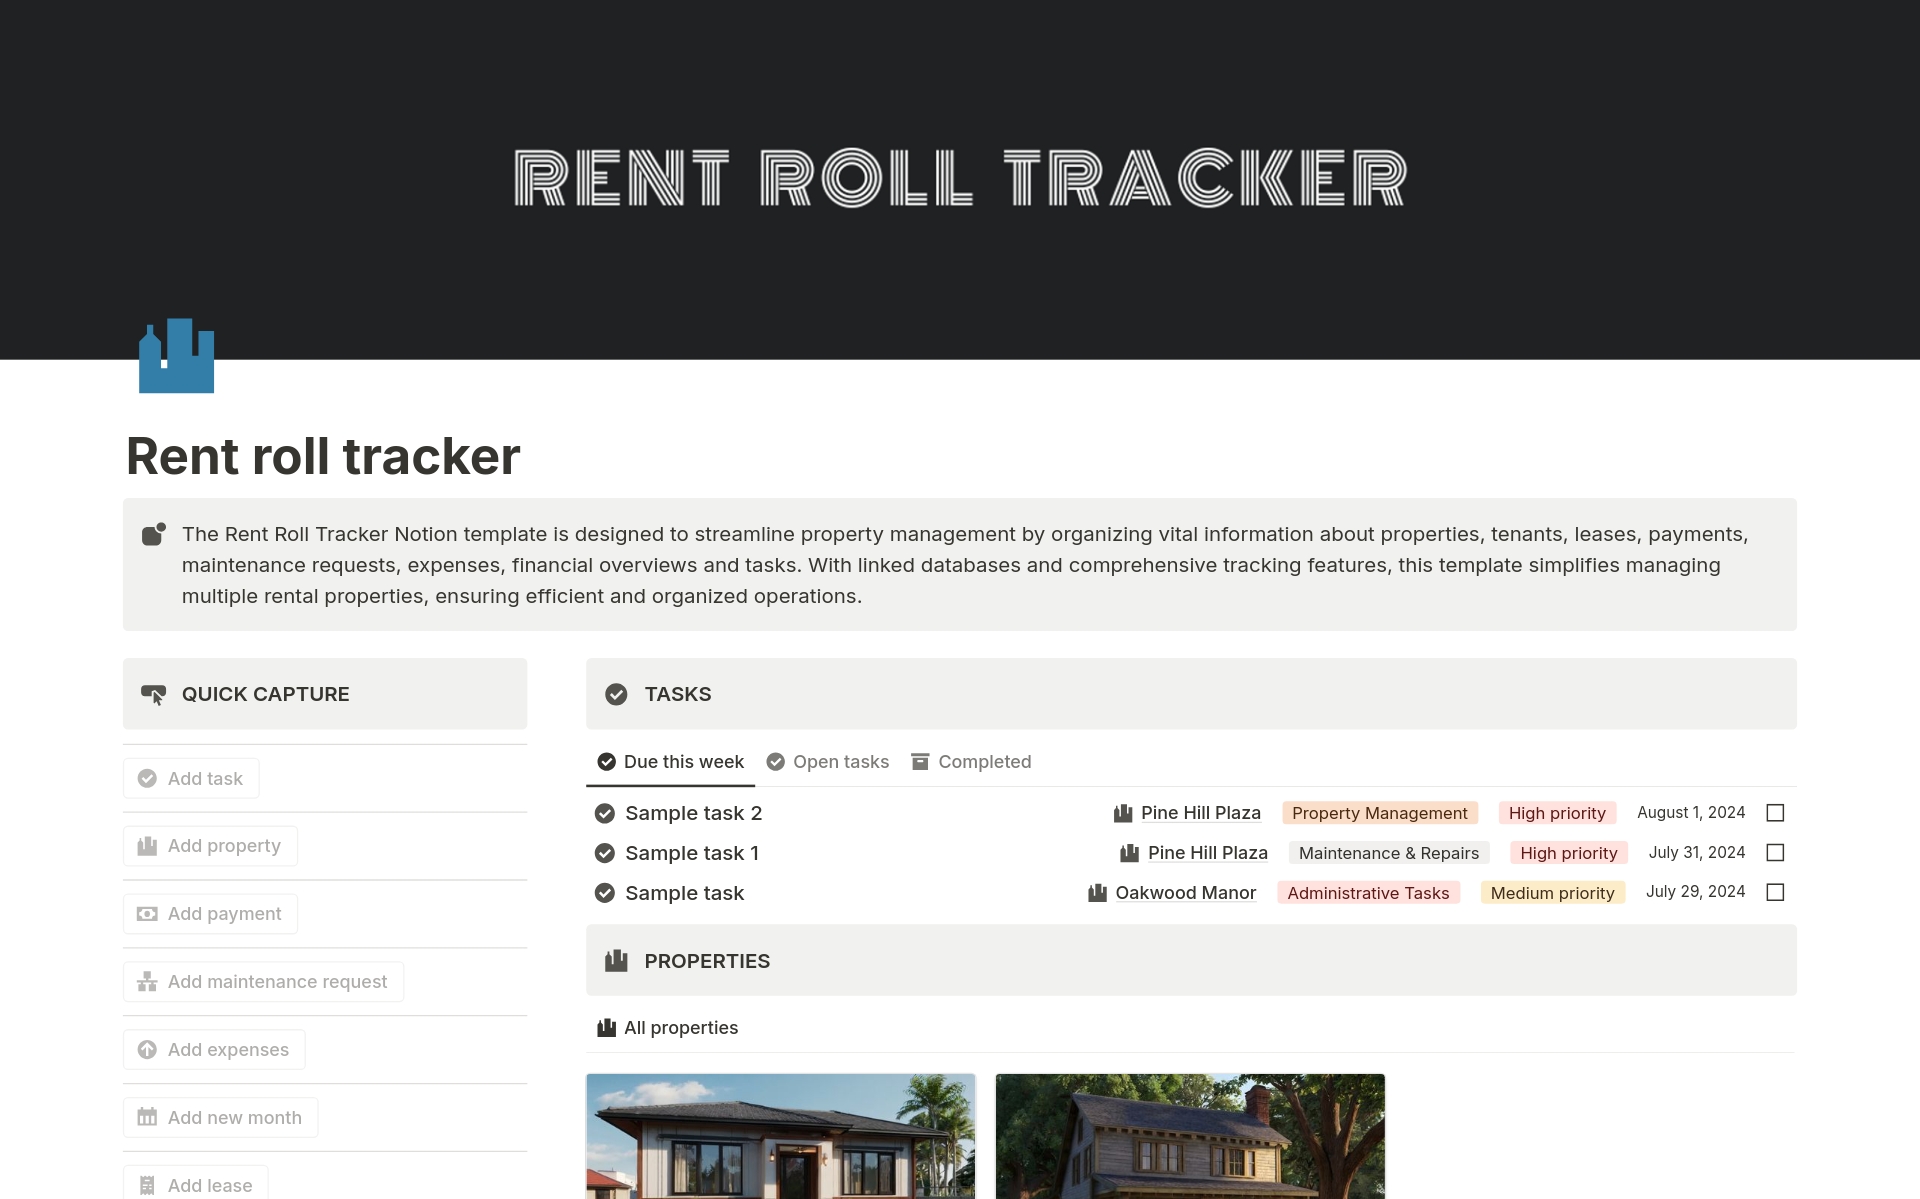 The Rent Roll Tracker Notion template is designed to streamline property management by organizing vital information about properties, tenants, leases, payments, maintenance requests, expenses, financial overviews and tasks.